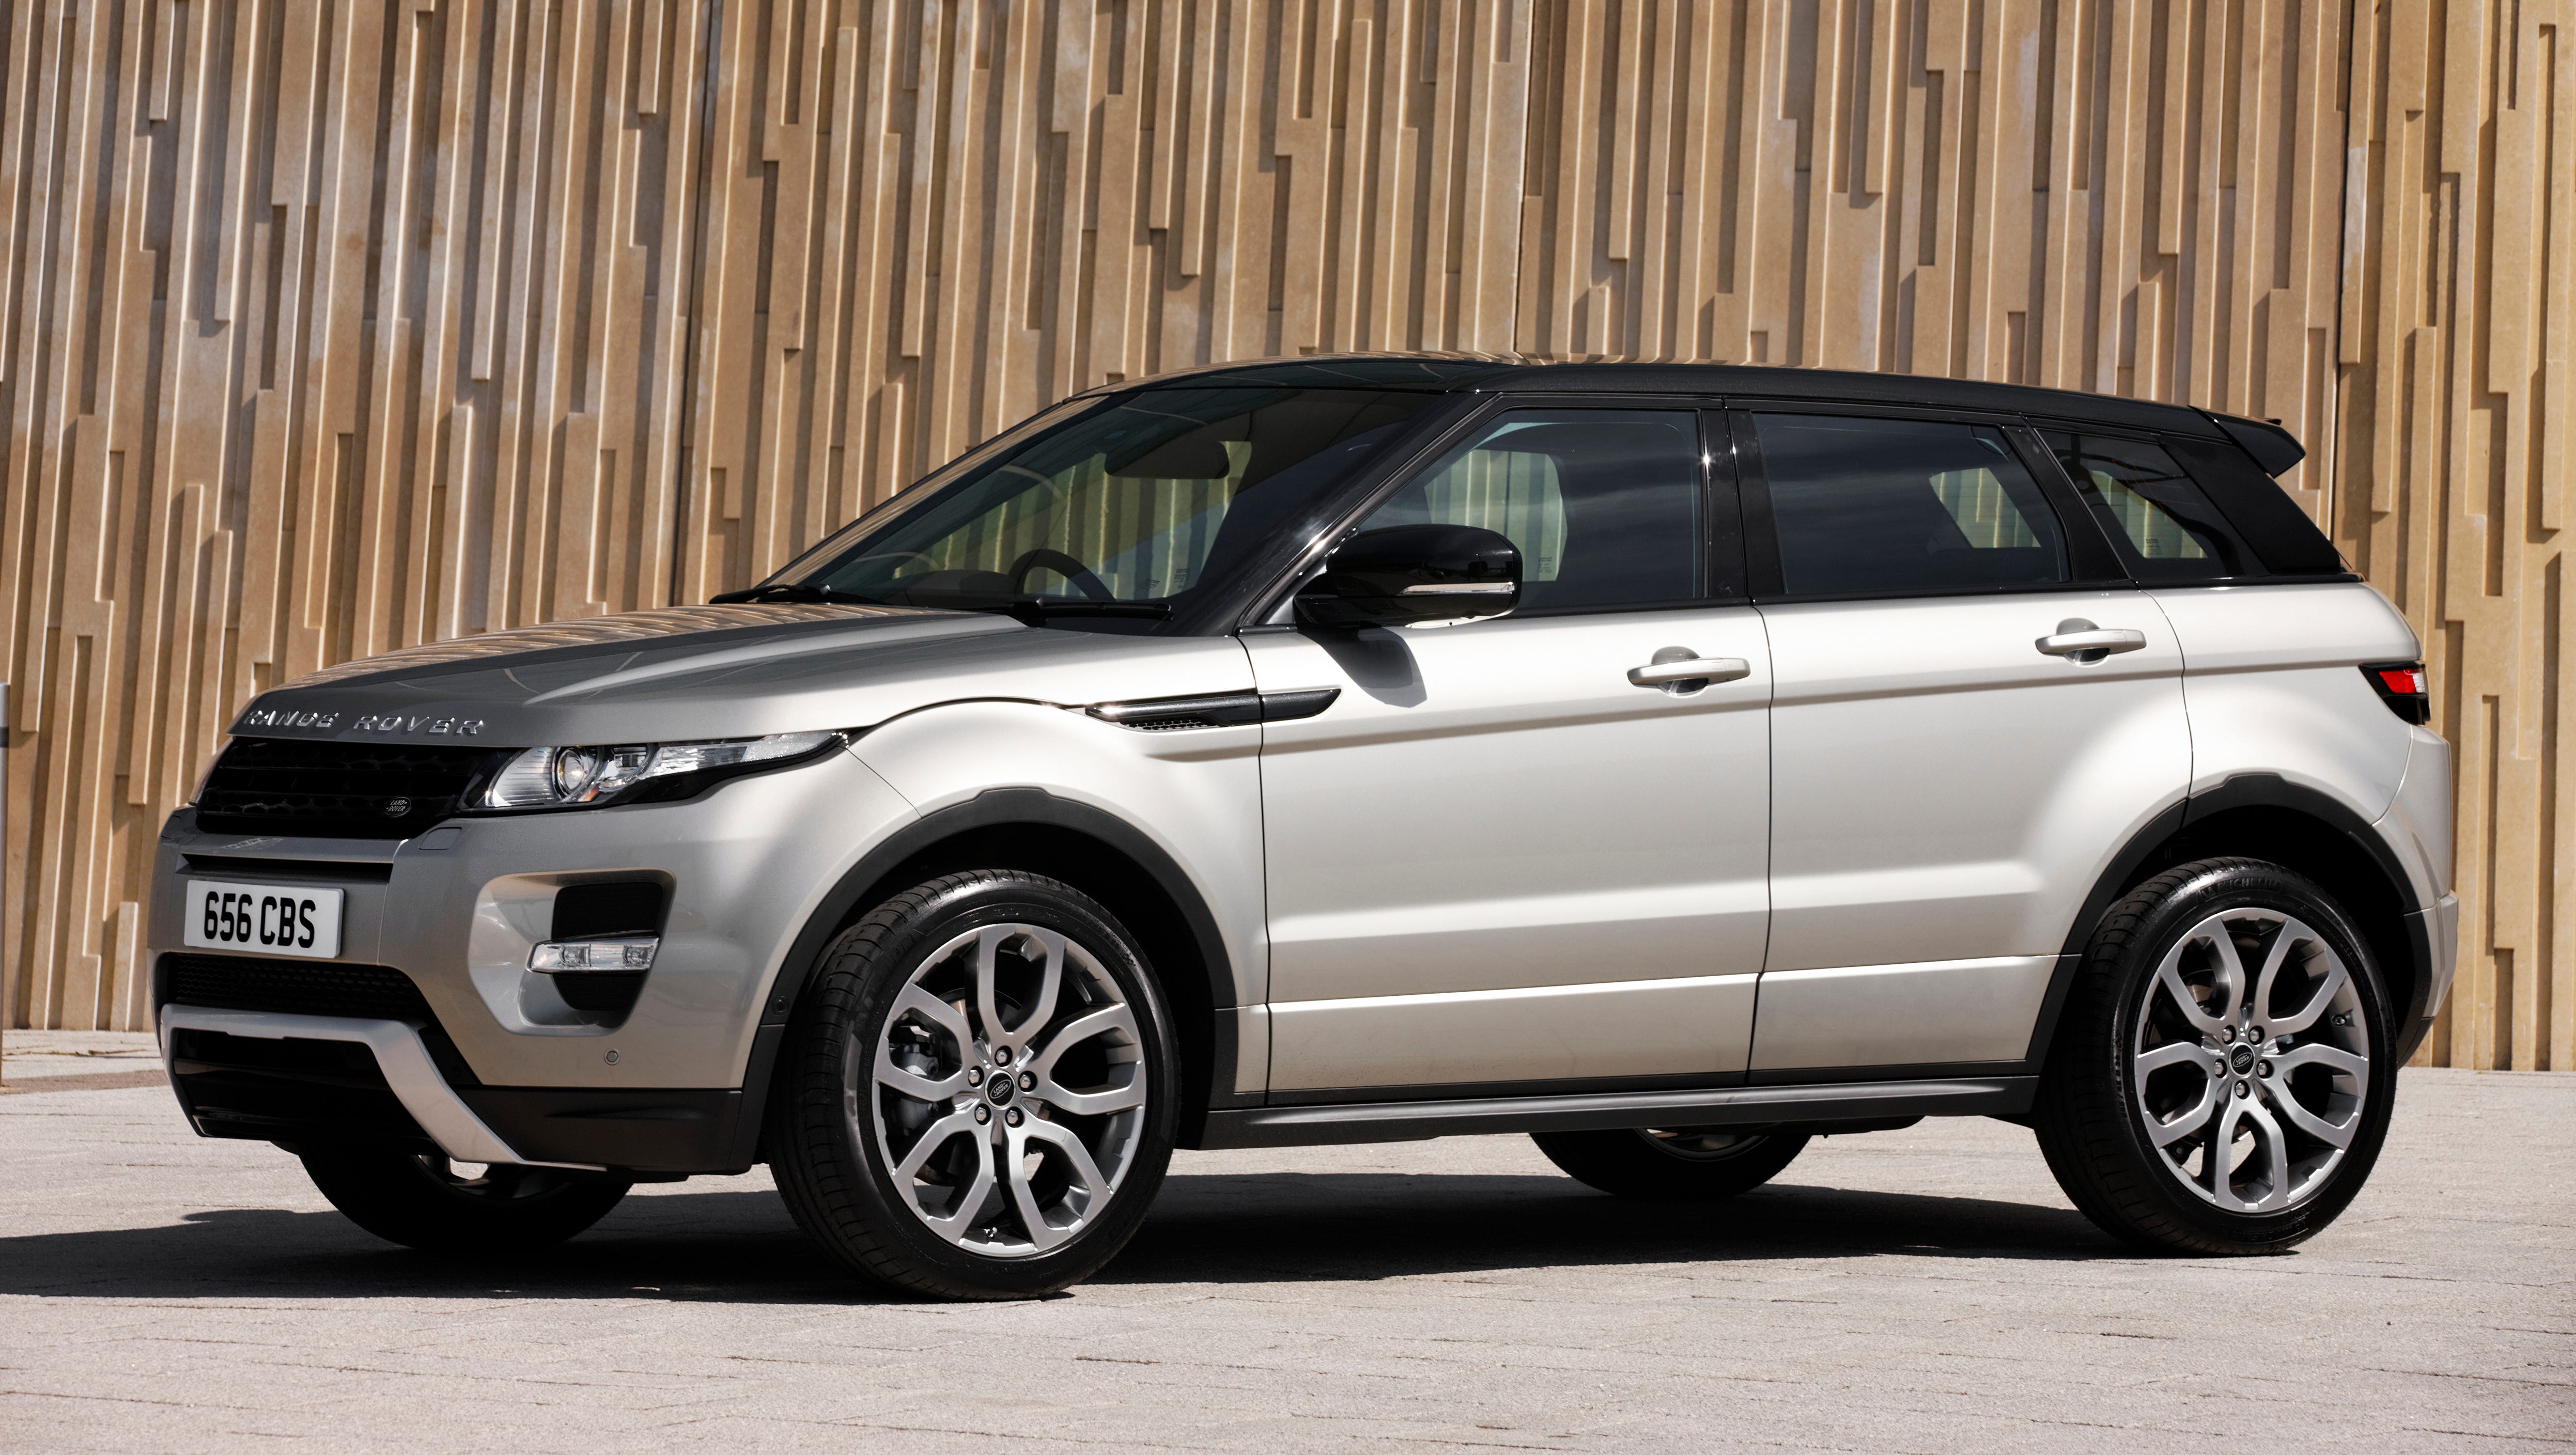 Kaap Bakken kust Auto review: 2015 Range Rover Evoque is well-behaved on drive to French  Lick Concours d'Elegance